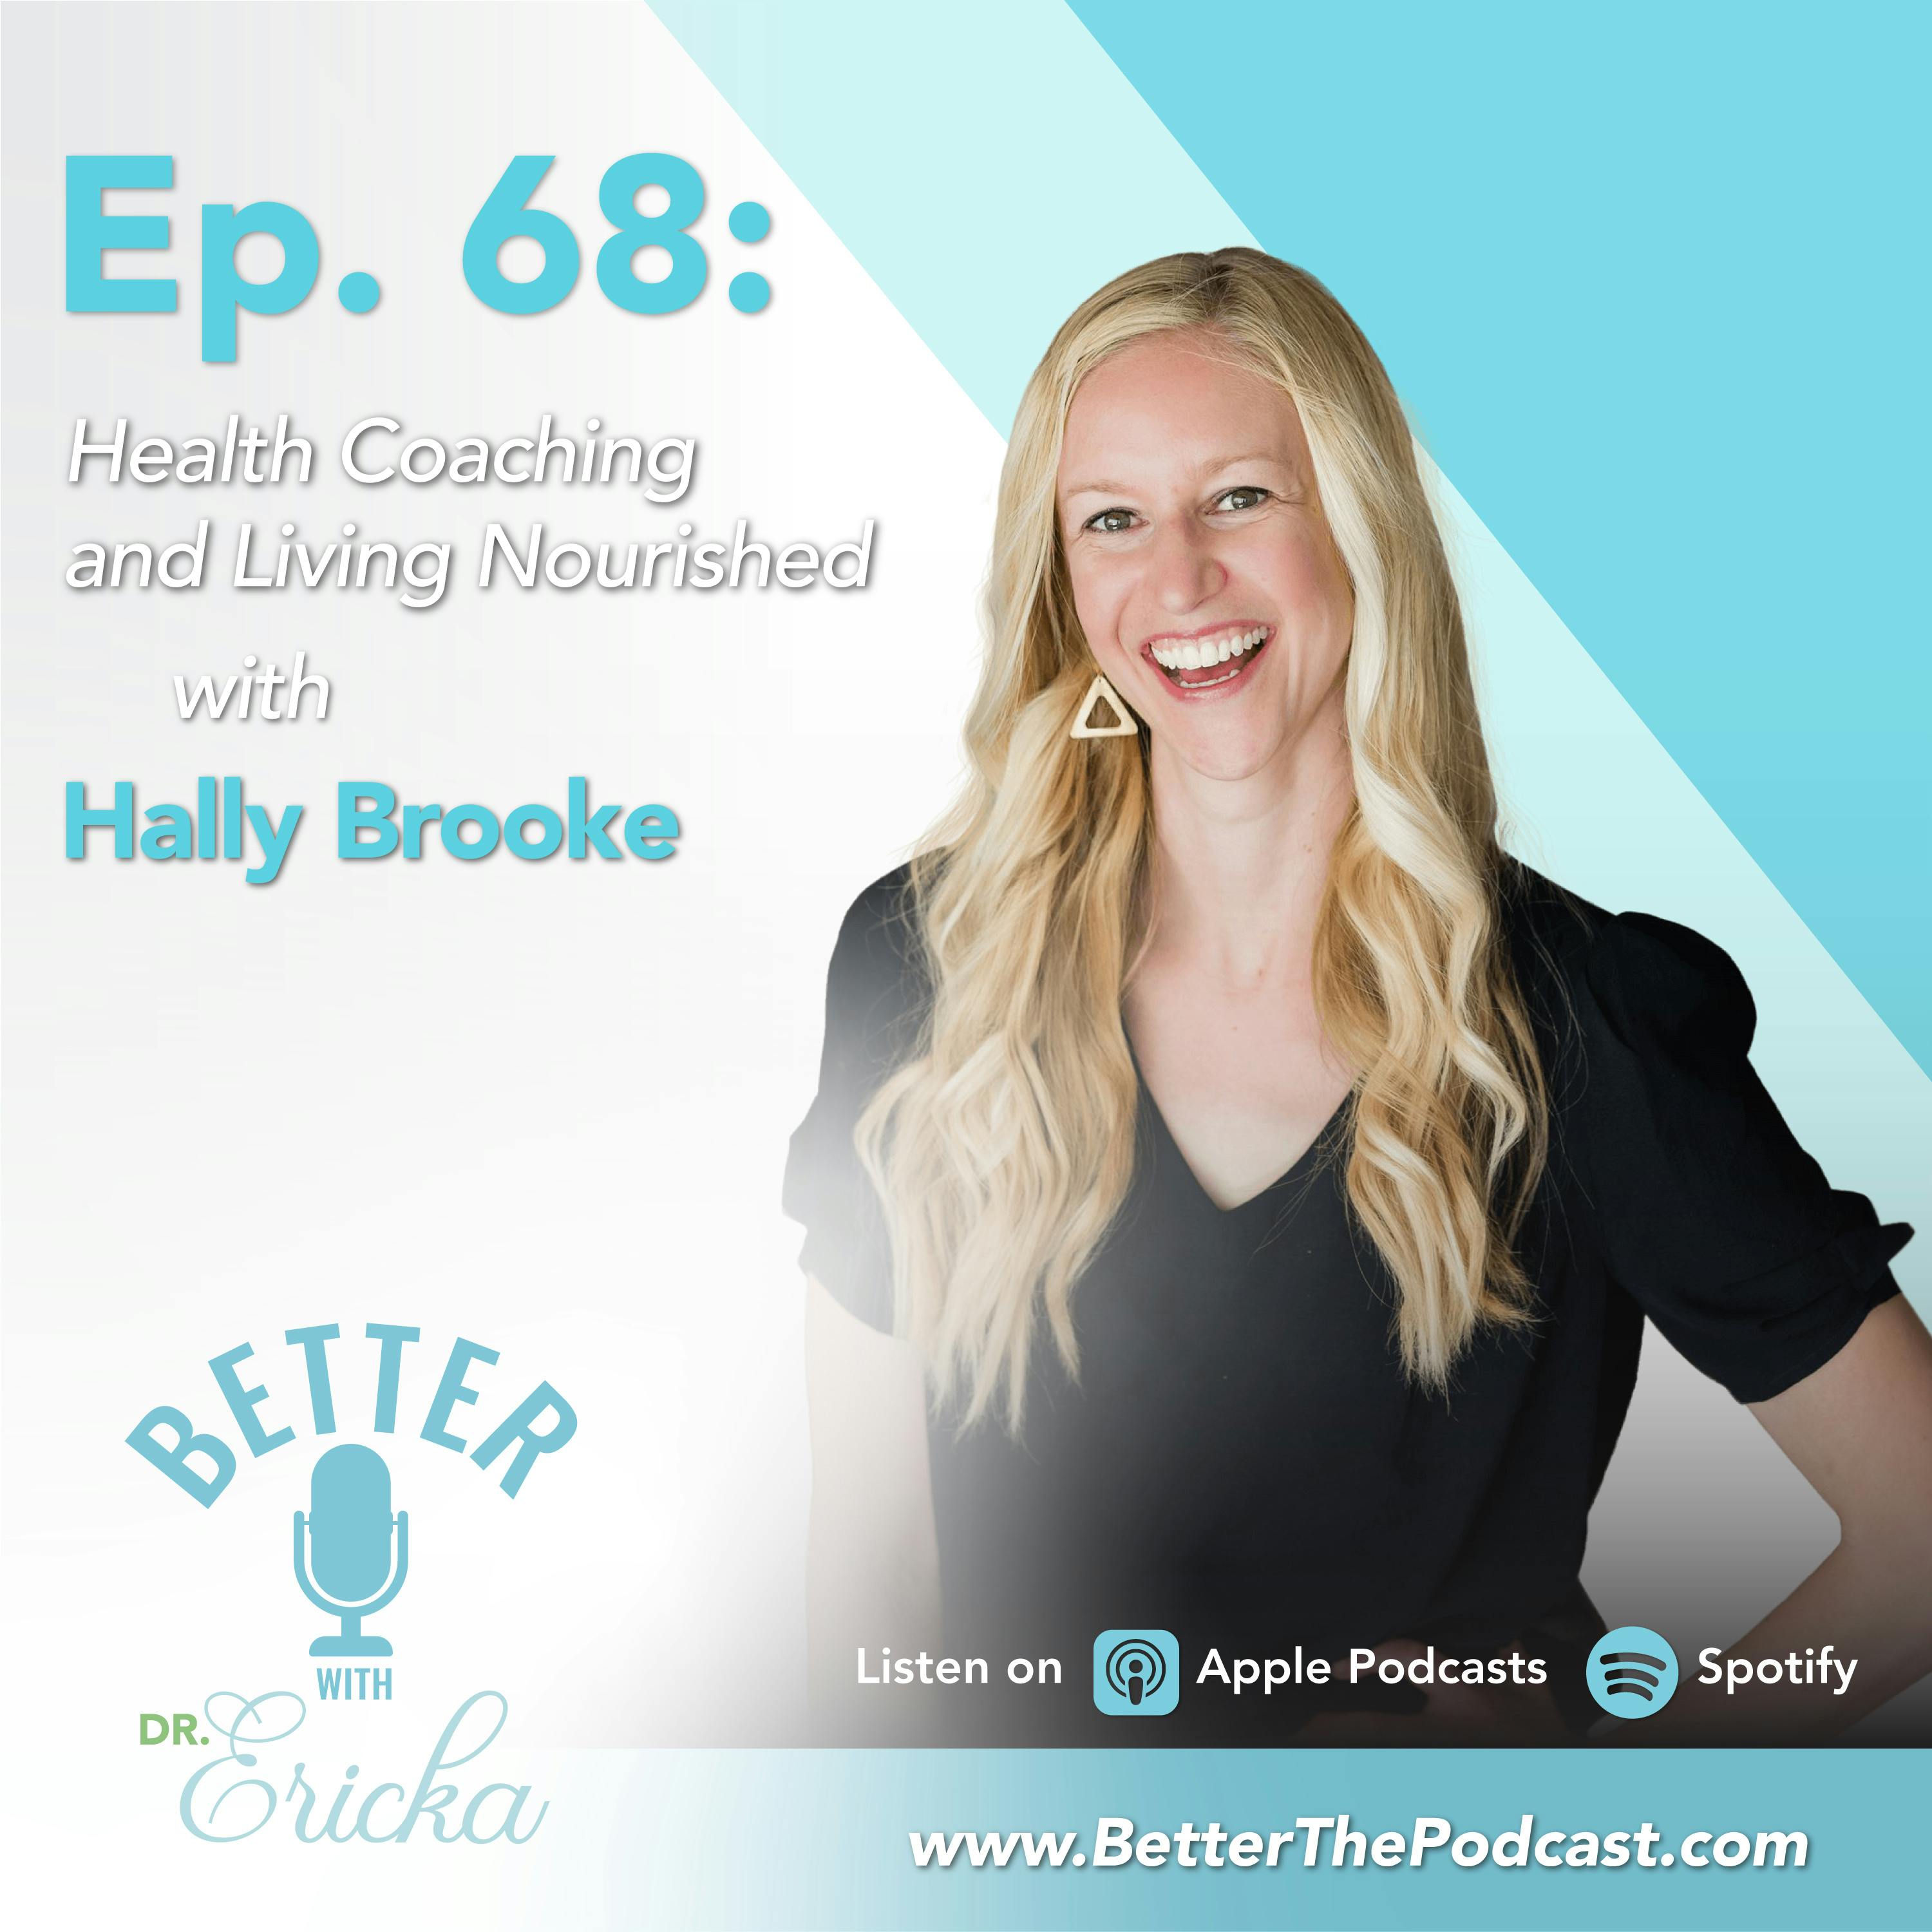 Health Coaching and Living Nourished with Hally Brooke